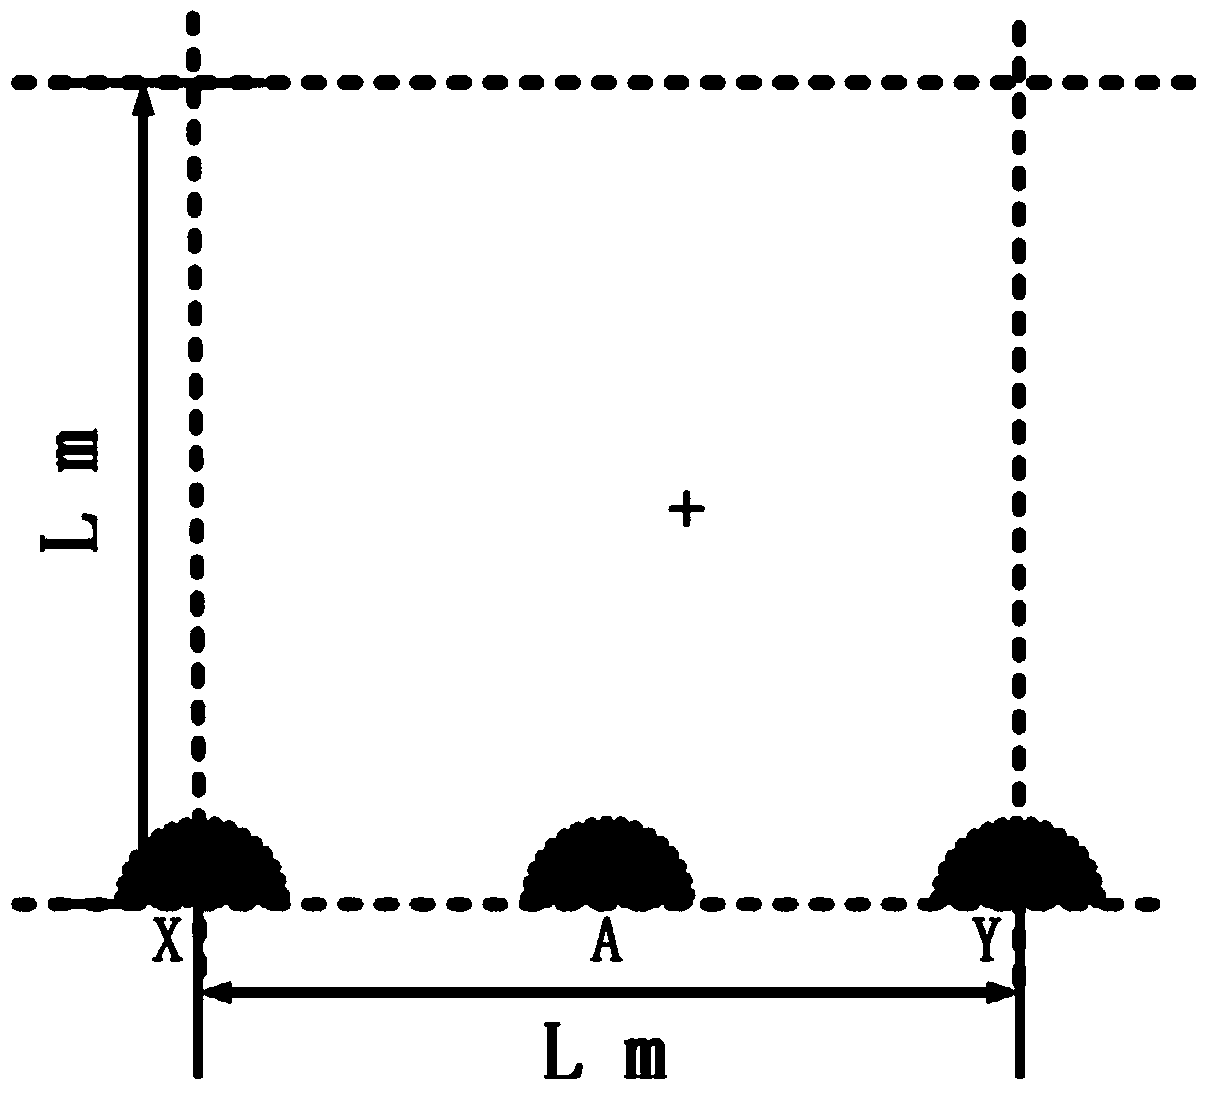 Passive type moving target locating method on the basis of Doppler frequency shift